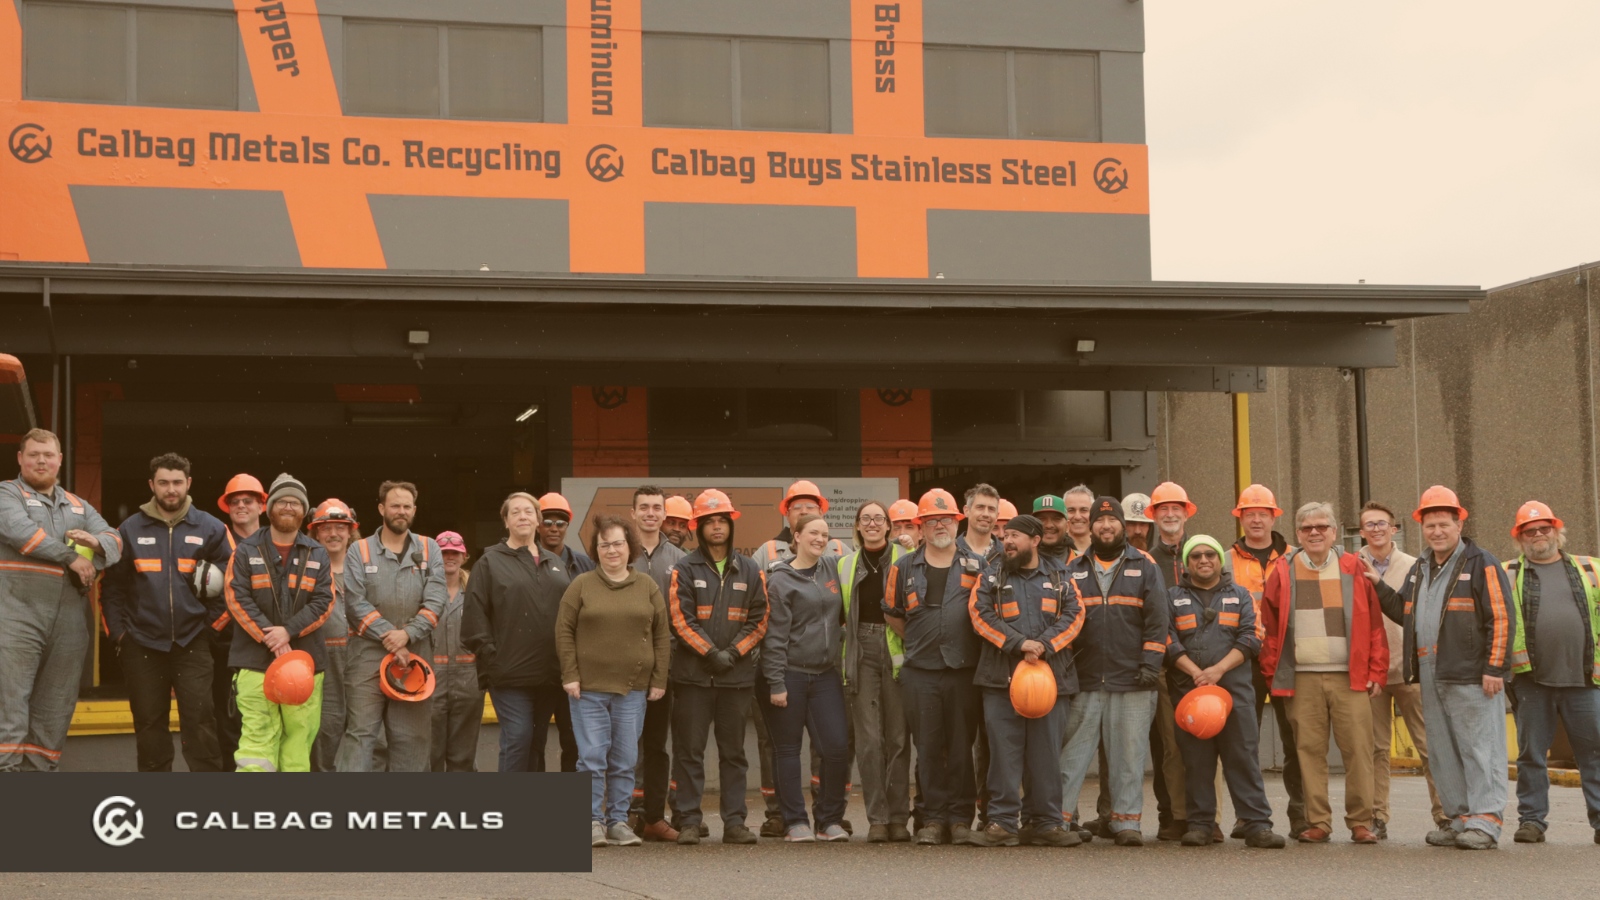 Calbag Team Photo Taken in front of Calbag Metals work place in Portland